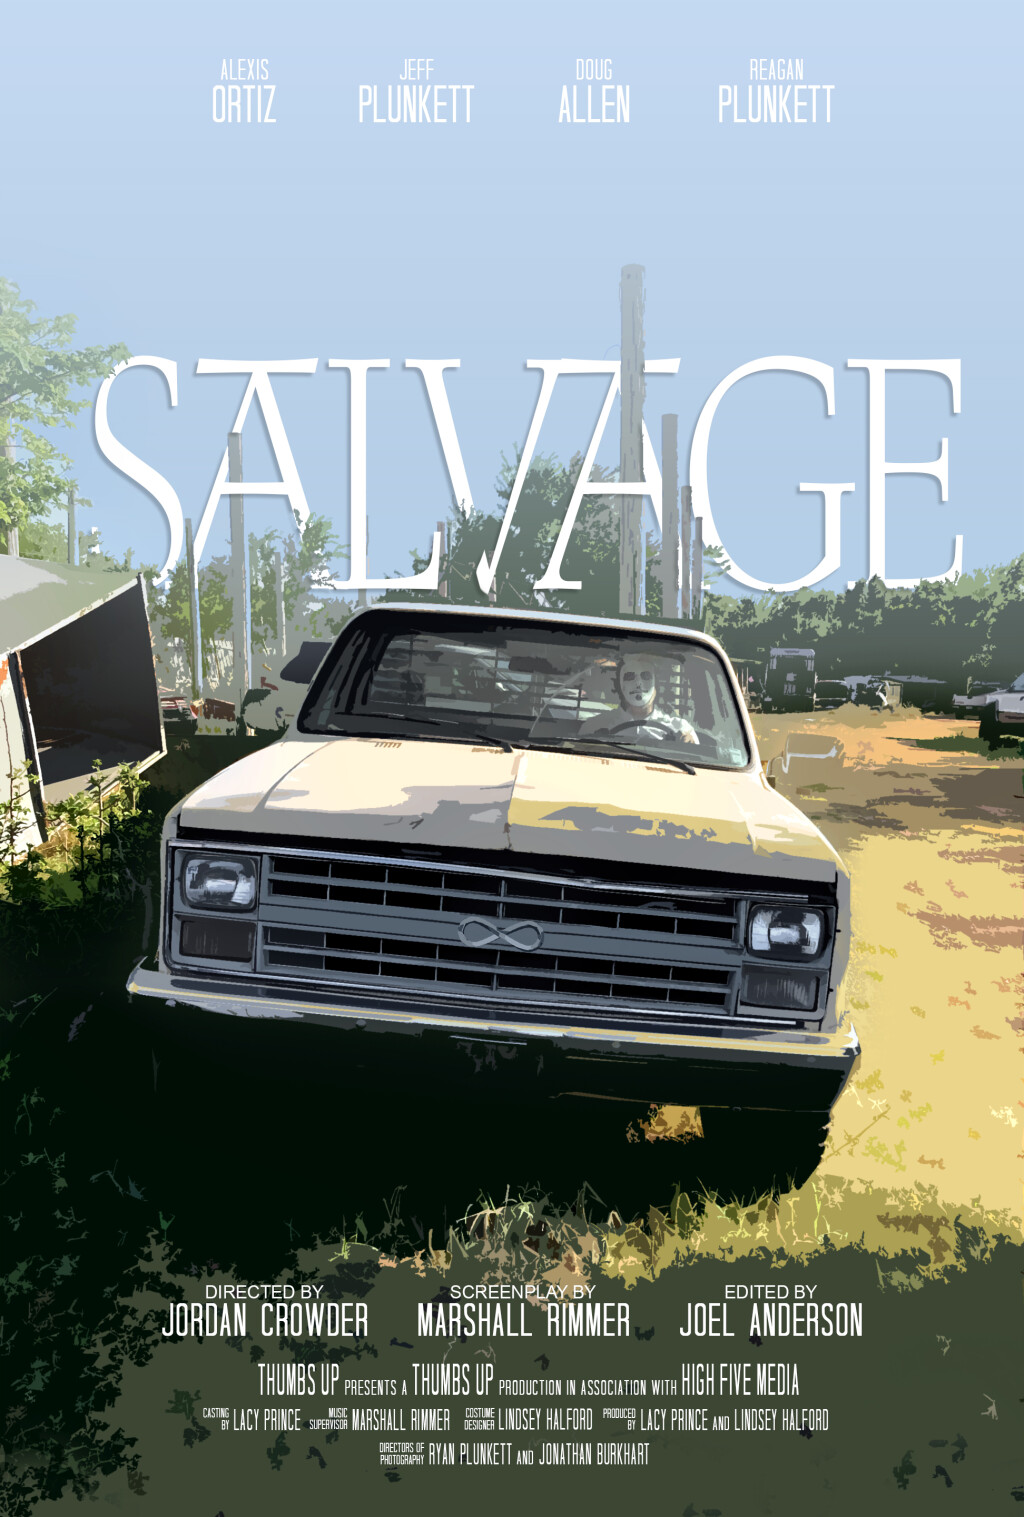 Filmposter for Salvage